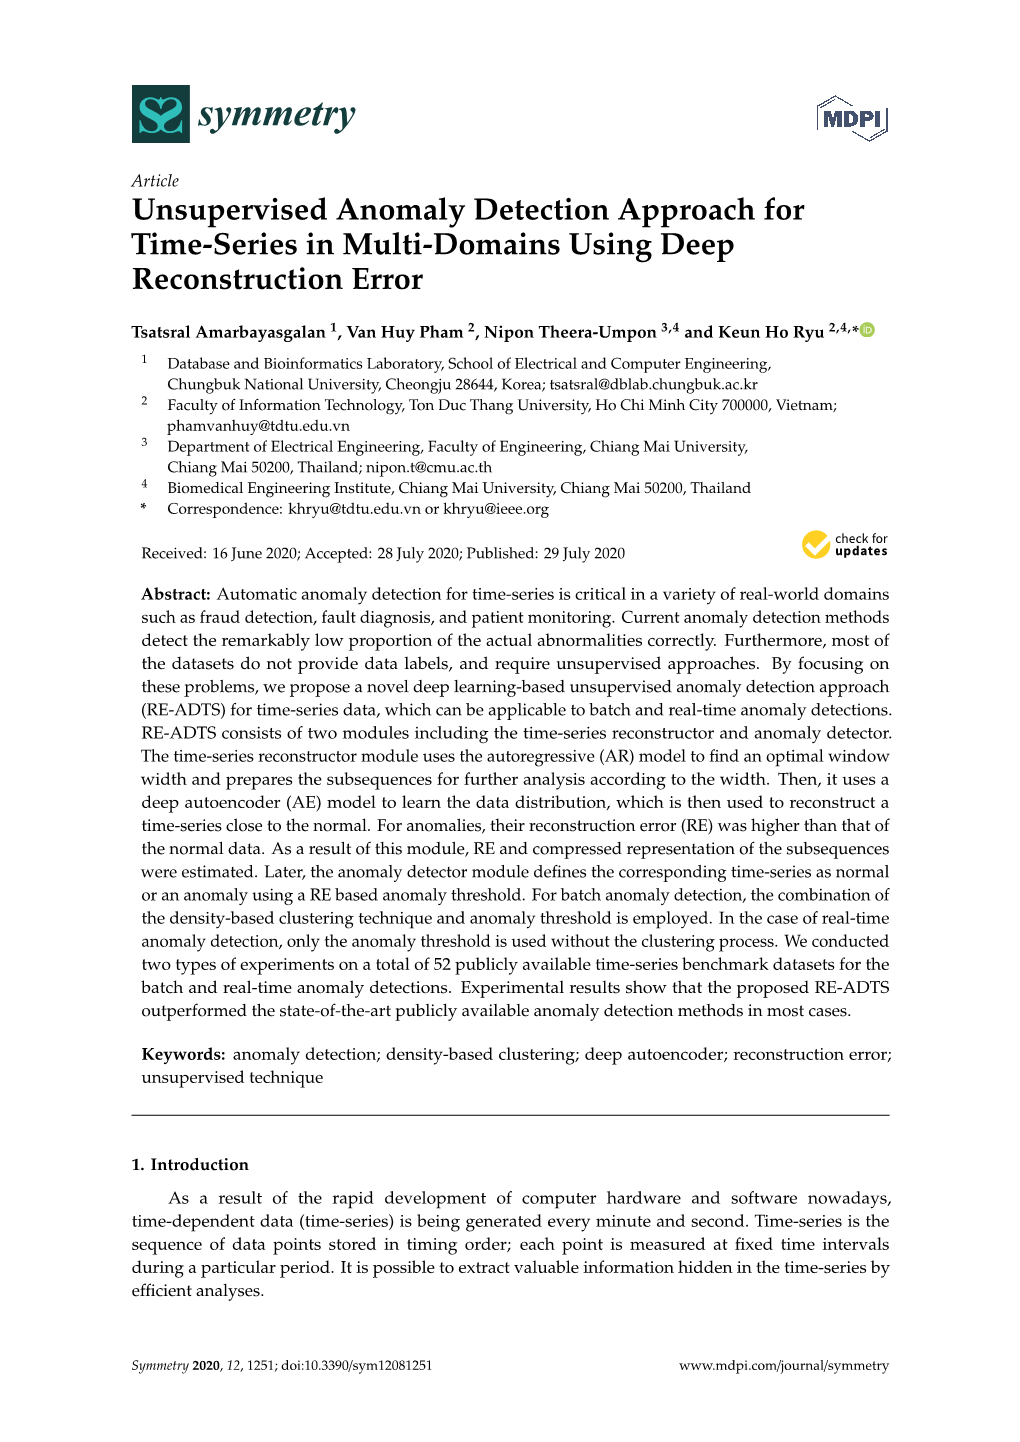 Unsupervised Anomaly Detection Approach for Time-Series in Multi-Domains Using Deep Reconstruction Error